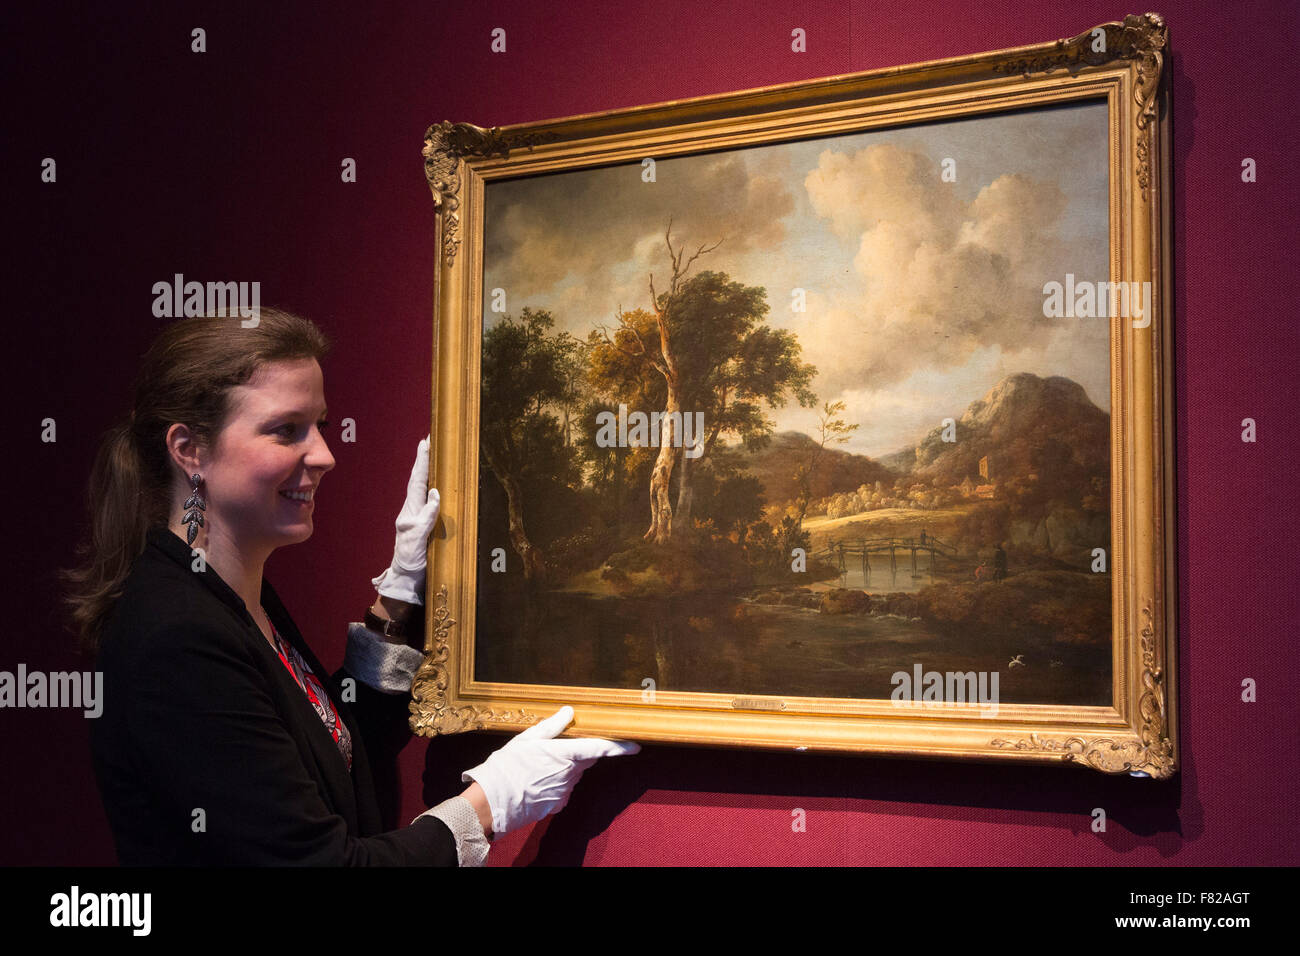 London, UK. 4 December 2015. Pictured: A Wooded River Landscape with Figures Crossing a Bridge by Jacob van Ruisdael, estimate: GBP 250,000-350,000. Christie's are re-examining nature, still life and Venice in the Old Master and British Paintings evening sale on 8 December 2015 in London. At this sale a large selection of paintings from private collections will be offered at auction, some of which have never been offered at auction before. Stock Photo